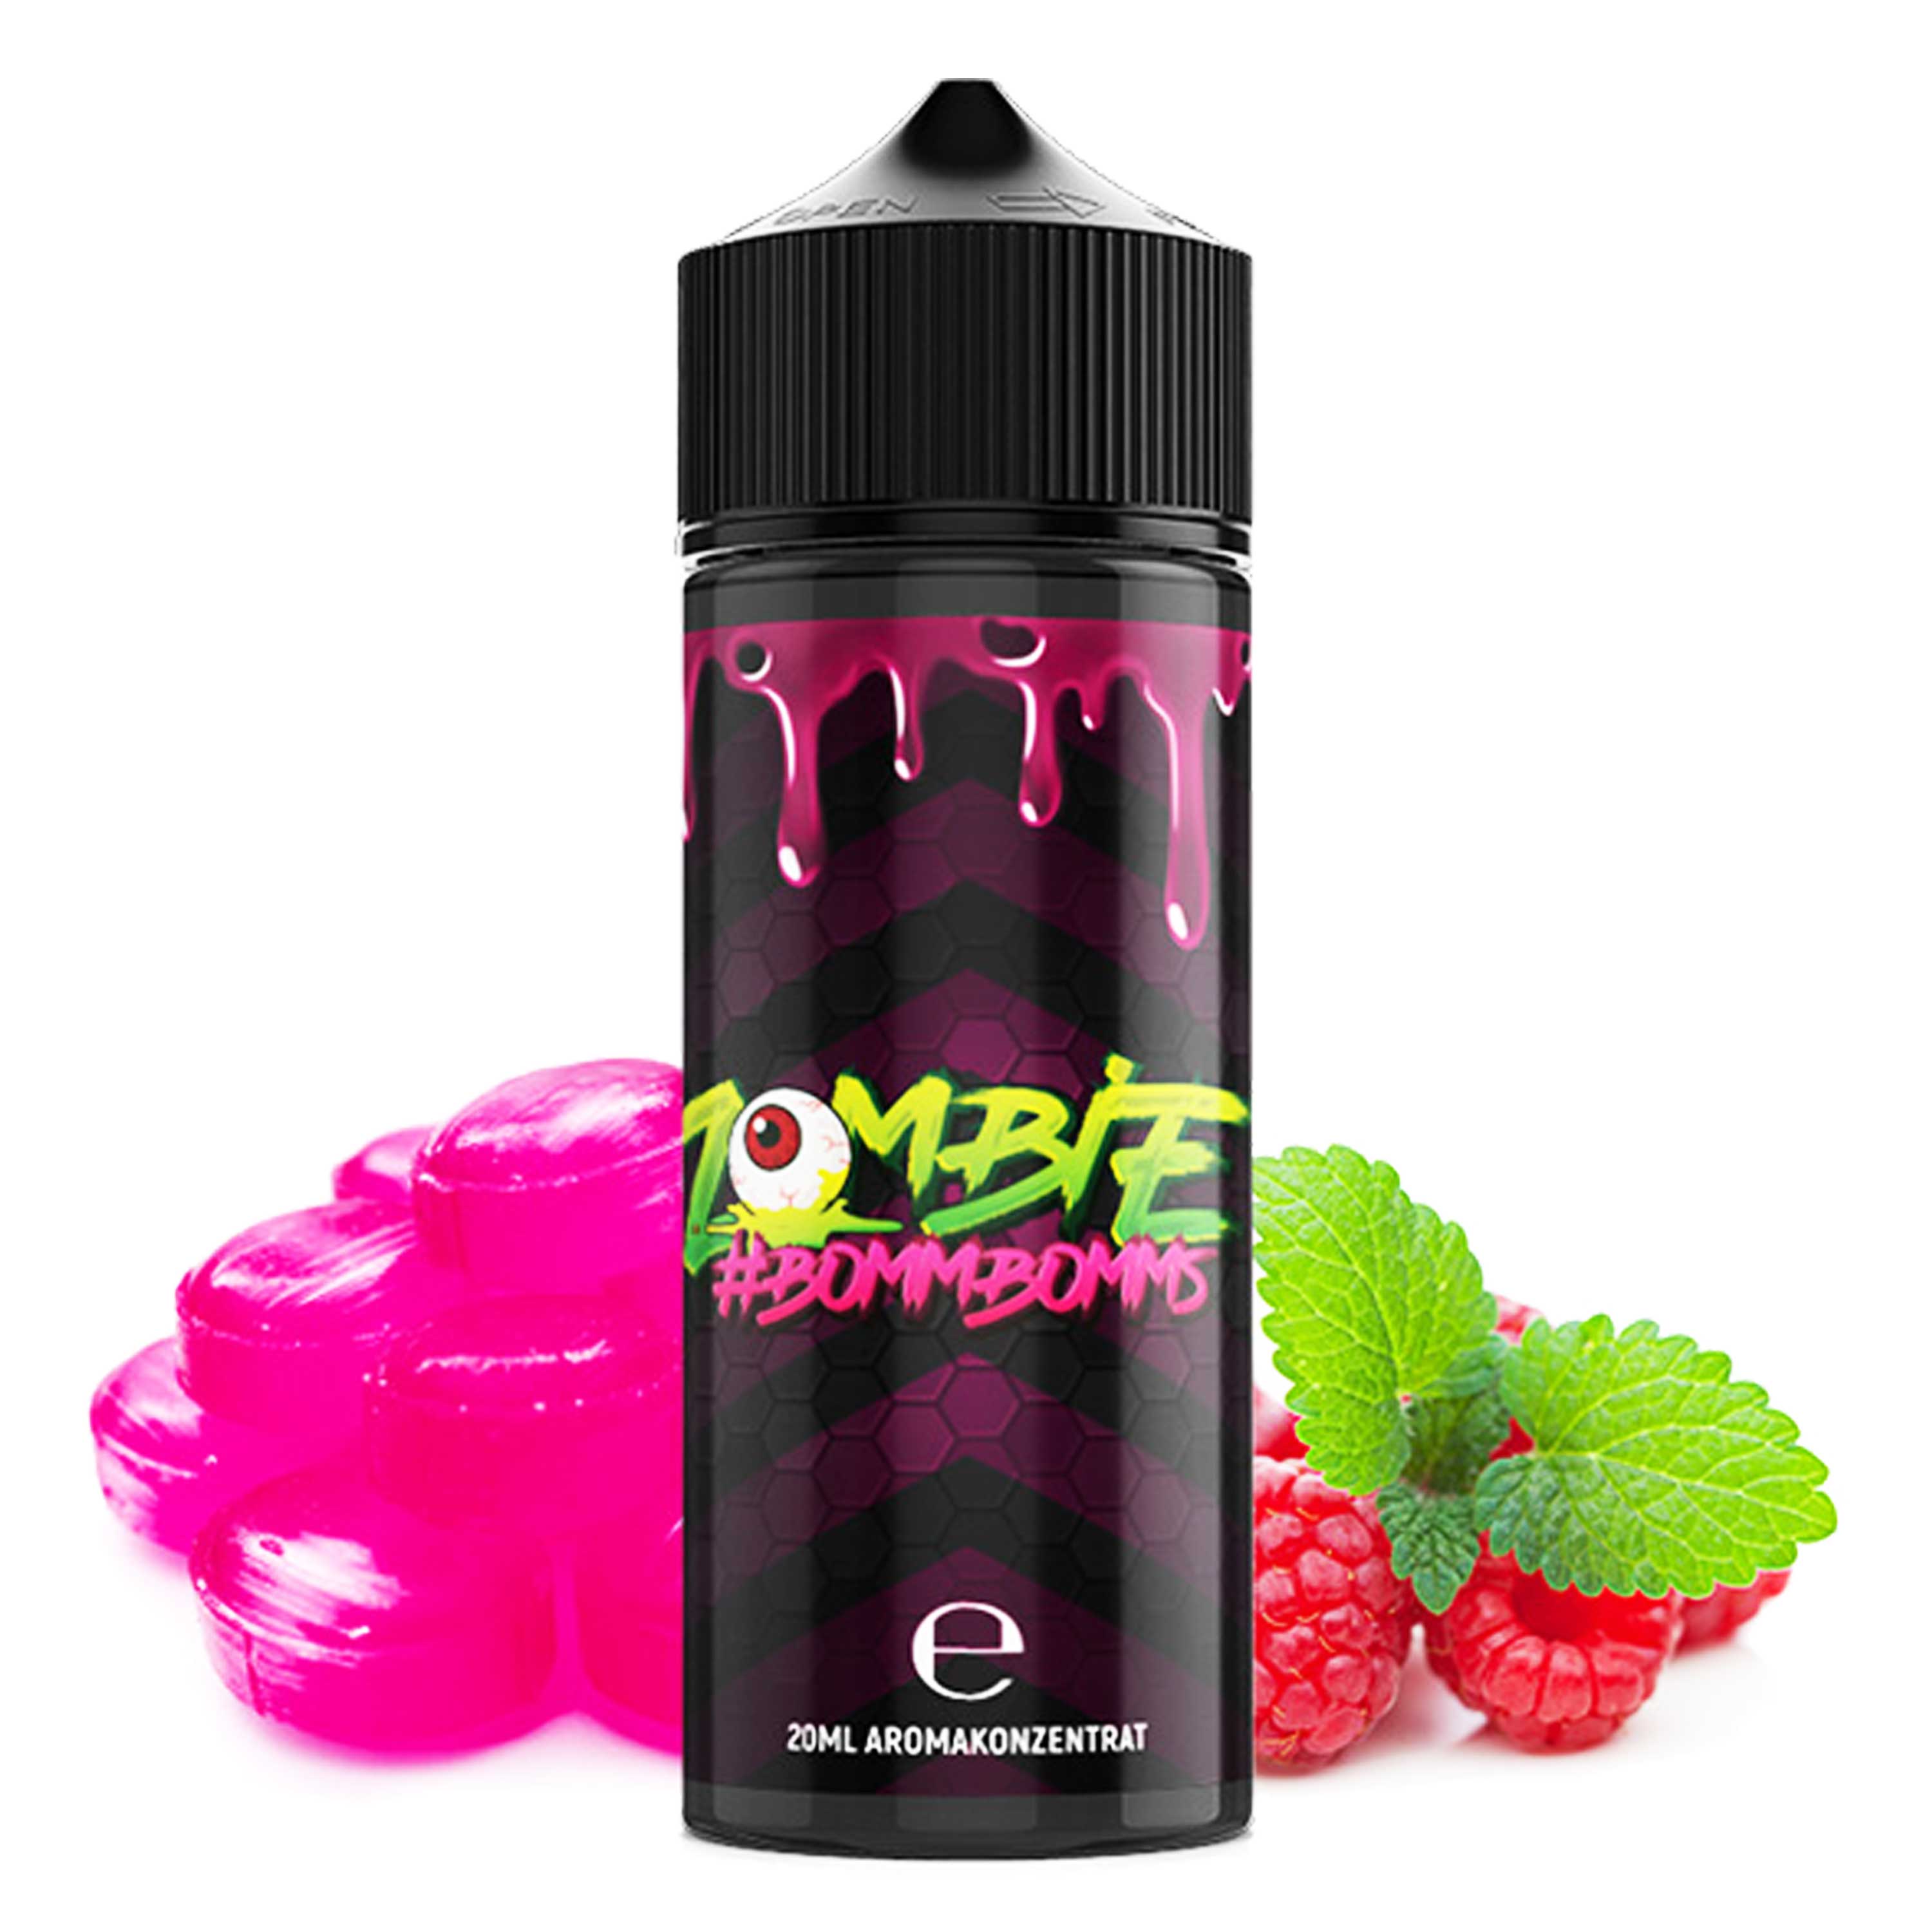 Zombie - #Bommbomms (20 ml in 120 ml LF) - Longfill-Aroma